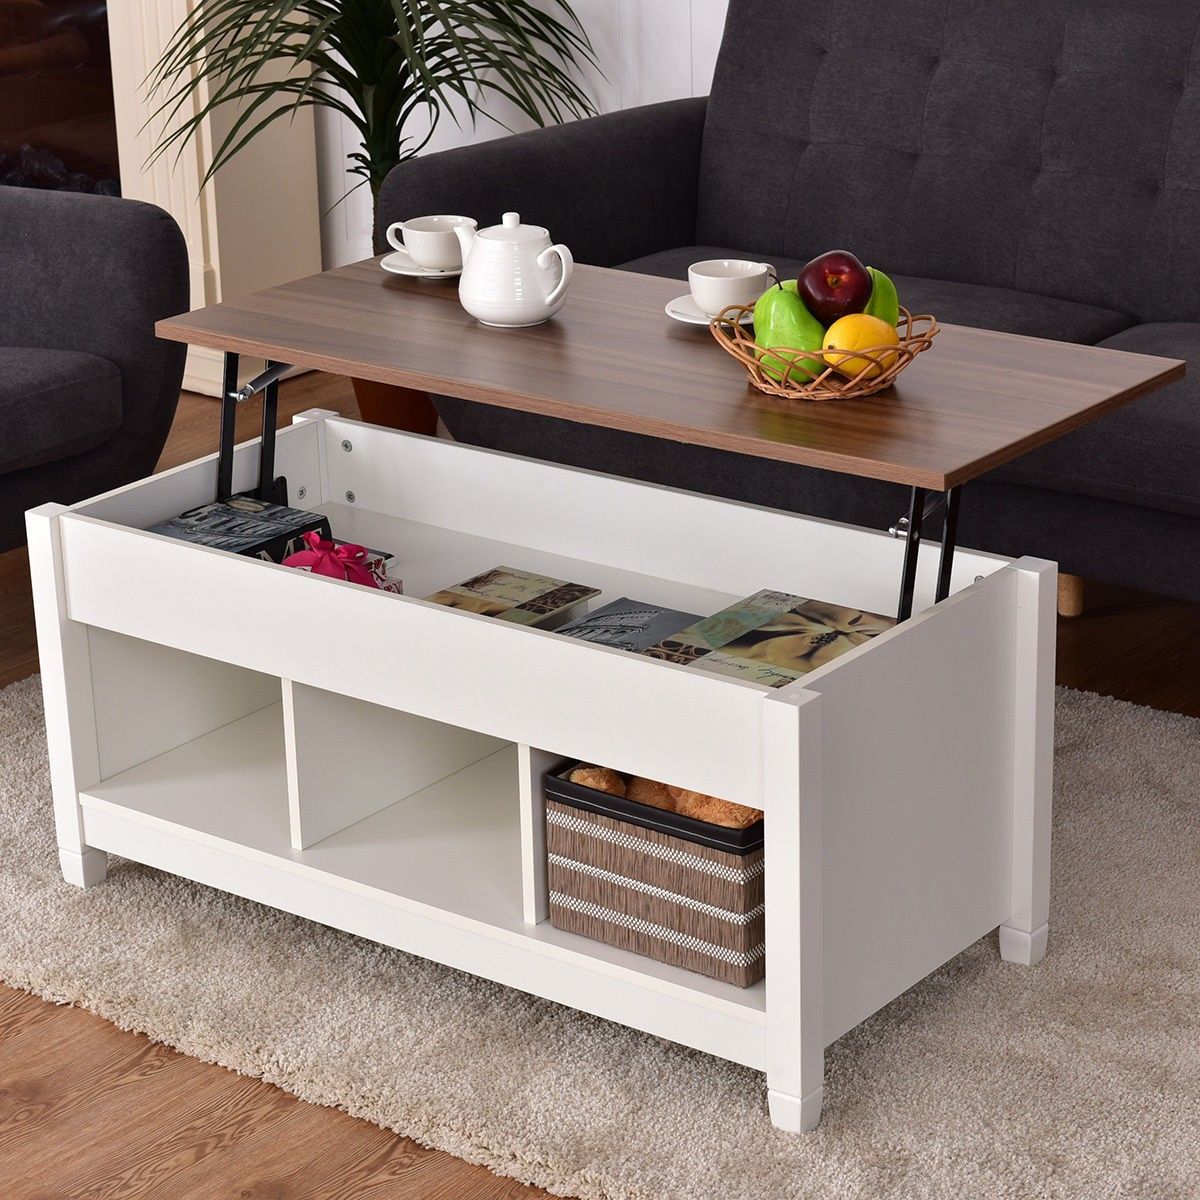 Lift Top Coffee Table With Hidden Storage Compartment Home Living Room For Lift Top Coffee Tables With Hidden Storage Compartments (Gallery 11 of 20)